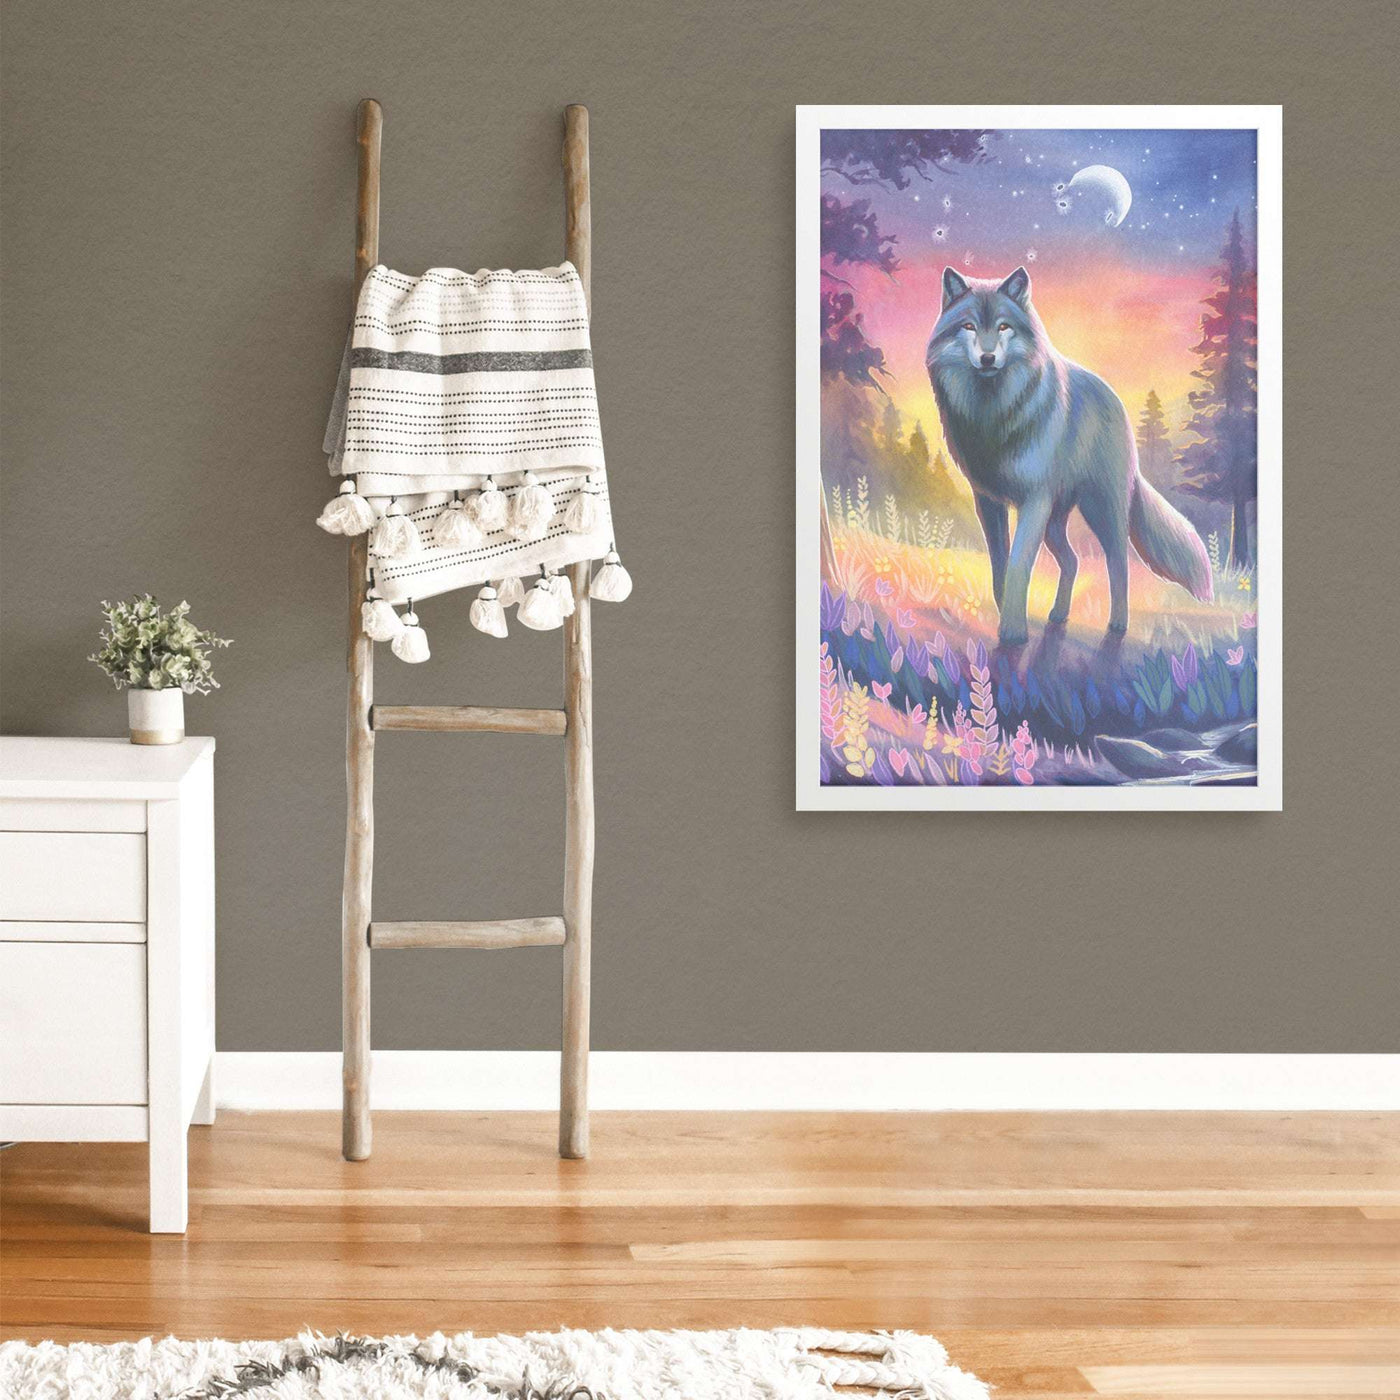 A vibrant Framed Wolf Art Print, displayed in a modern room next to a wooden ladder with hanging linens and a small white cabinet with a plant.